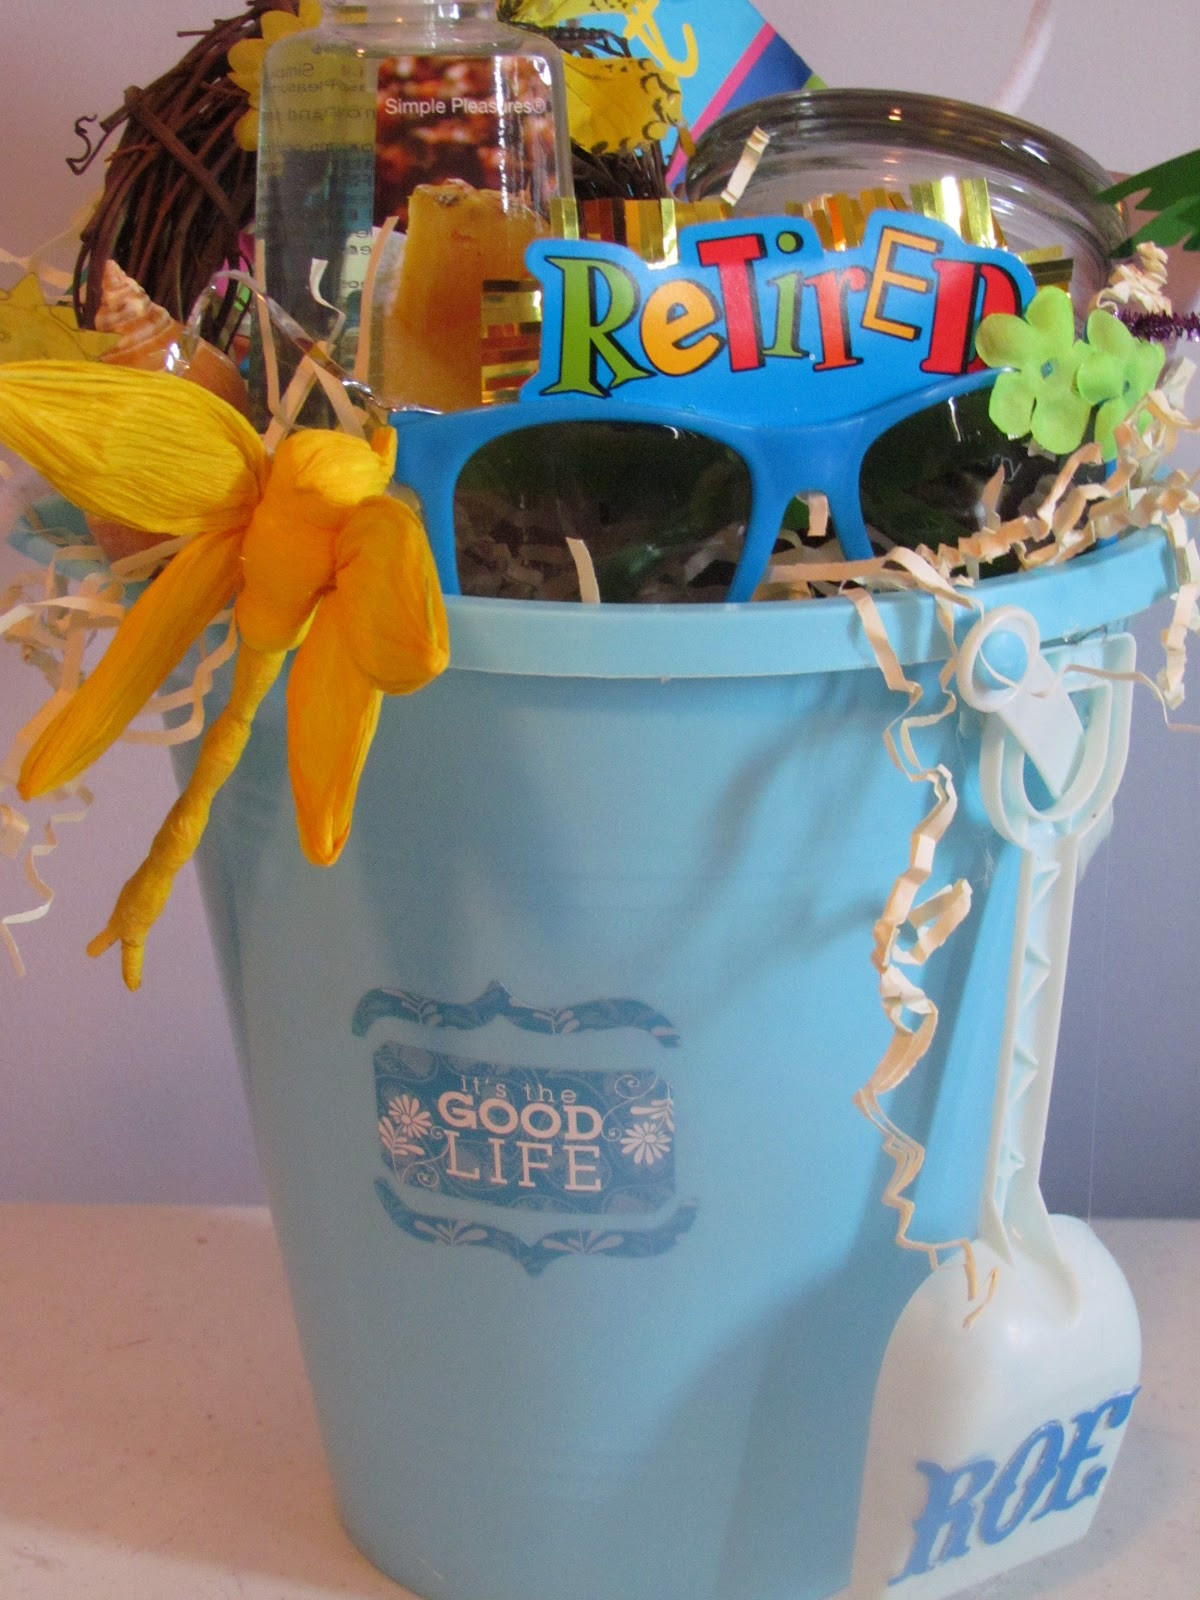 Retirement Party Gift Ideas For Friends
 Family Food Fun and Lots of Little Things Gift Baskets